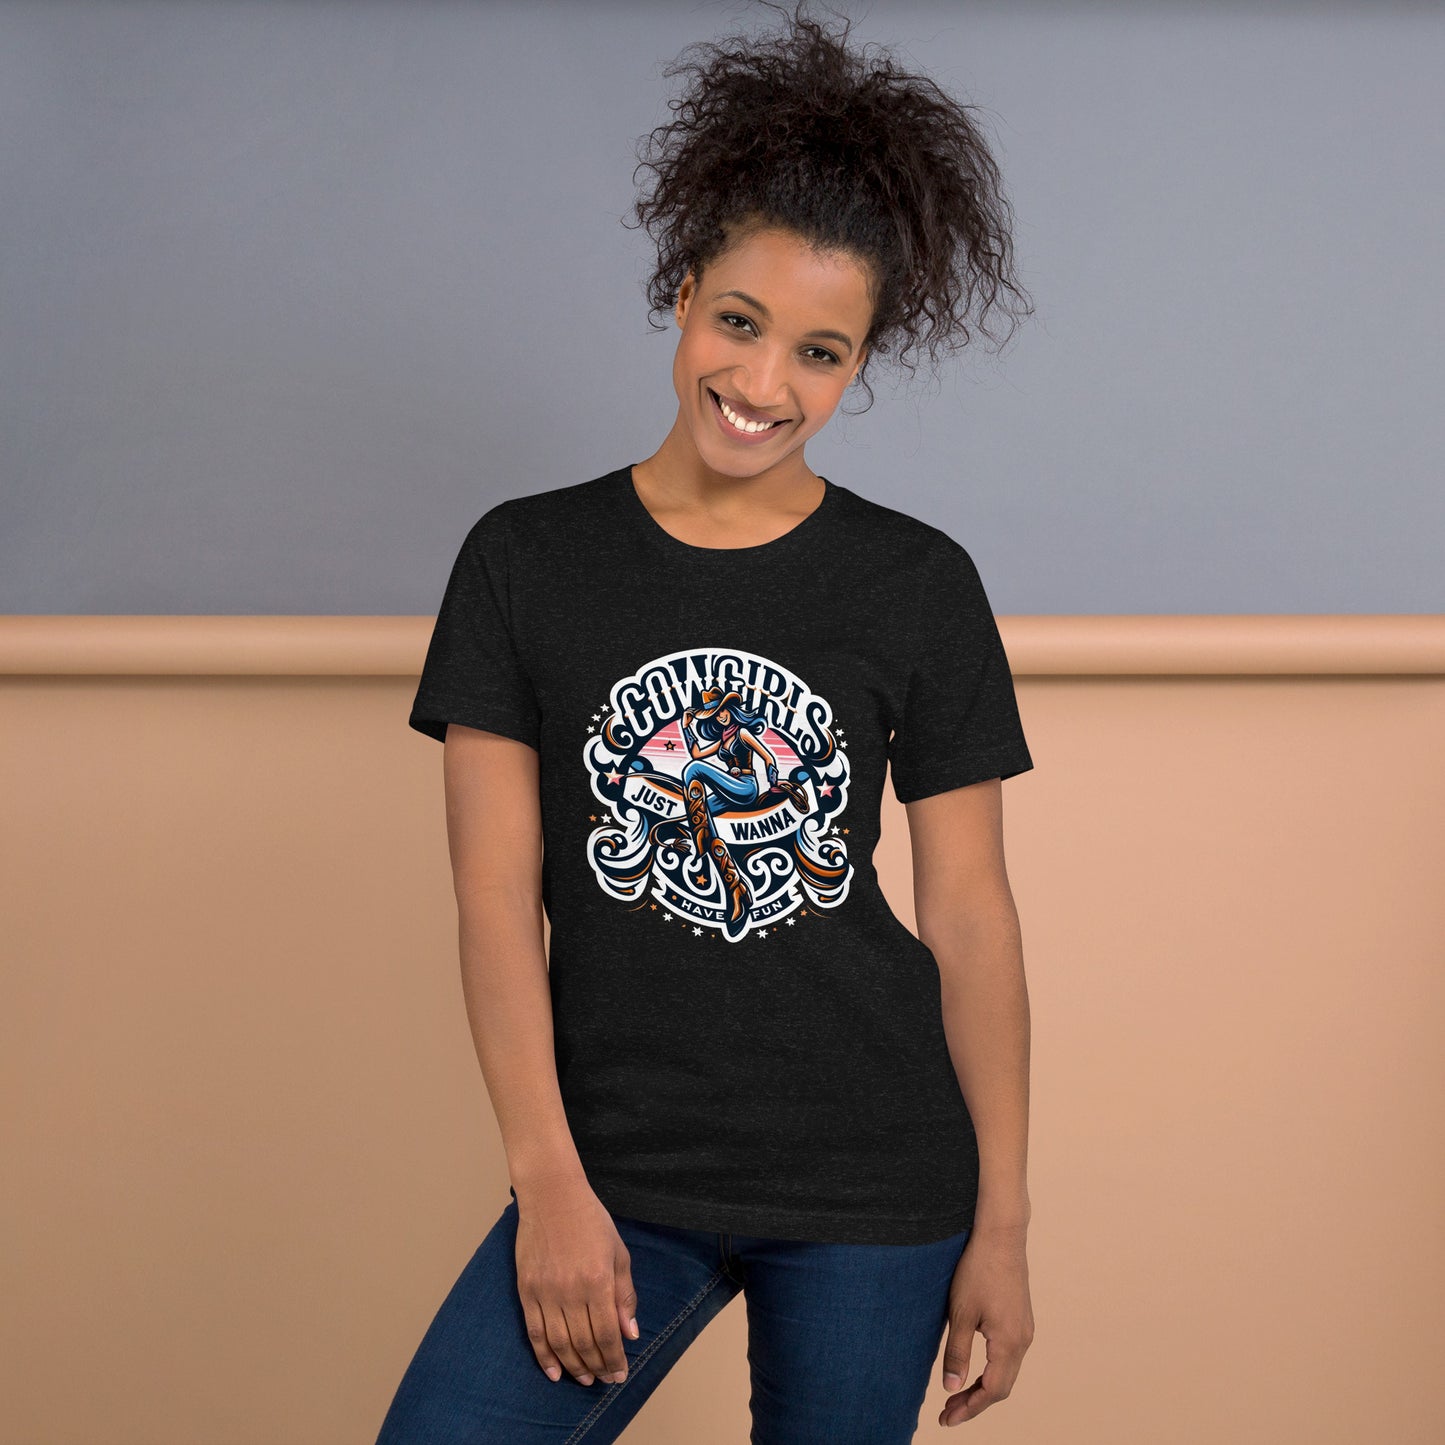 Cowgirls Just Wanna have Fun Unisex Graphic Tee